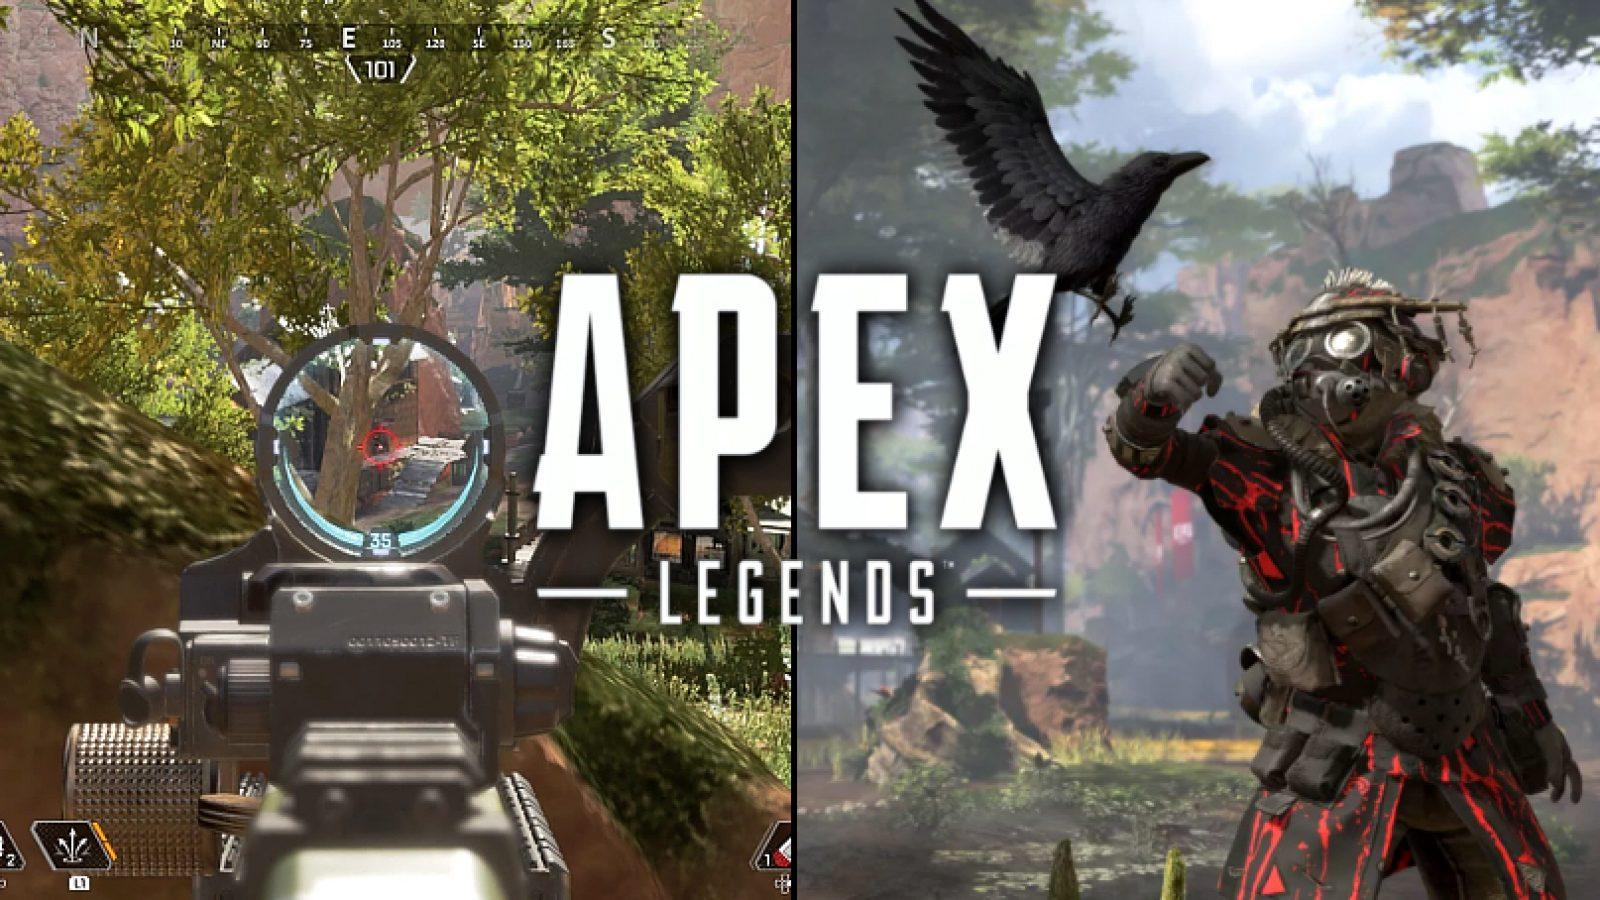 15 expert tips to help you win in Apex Legends